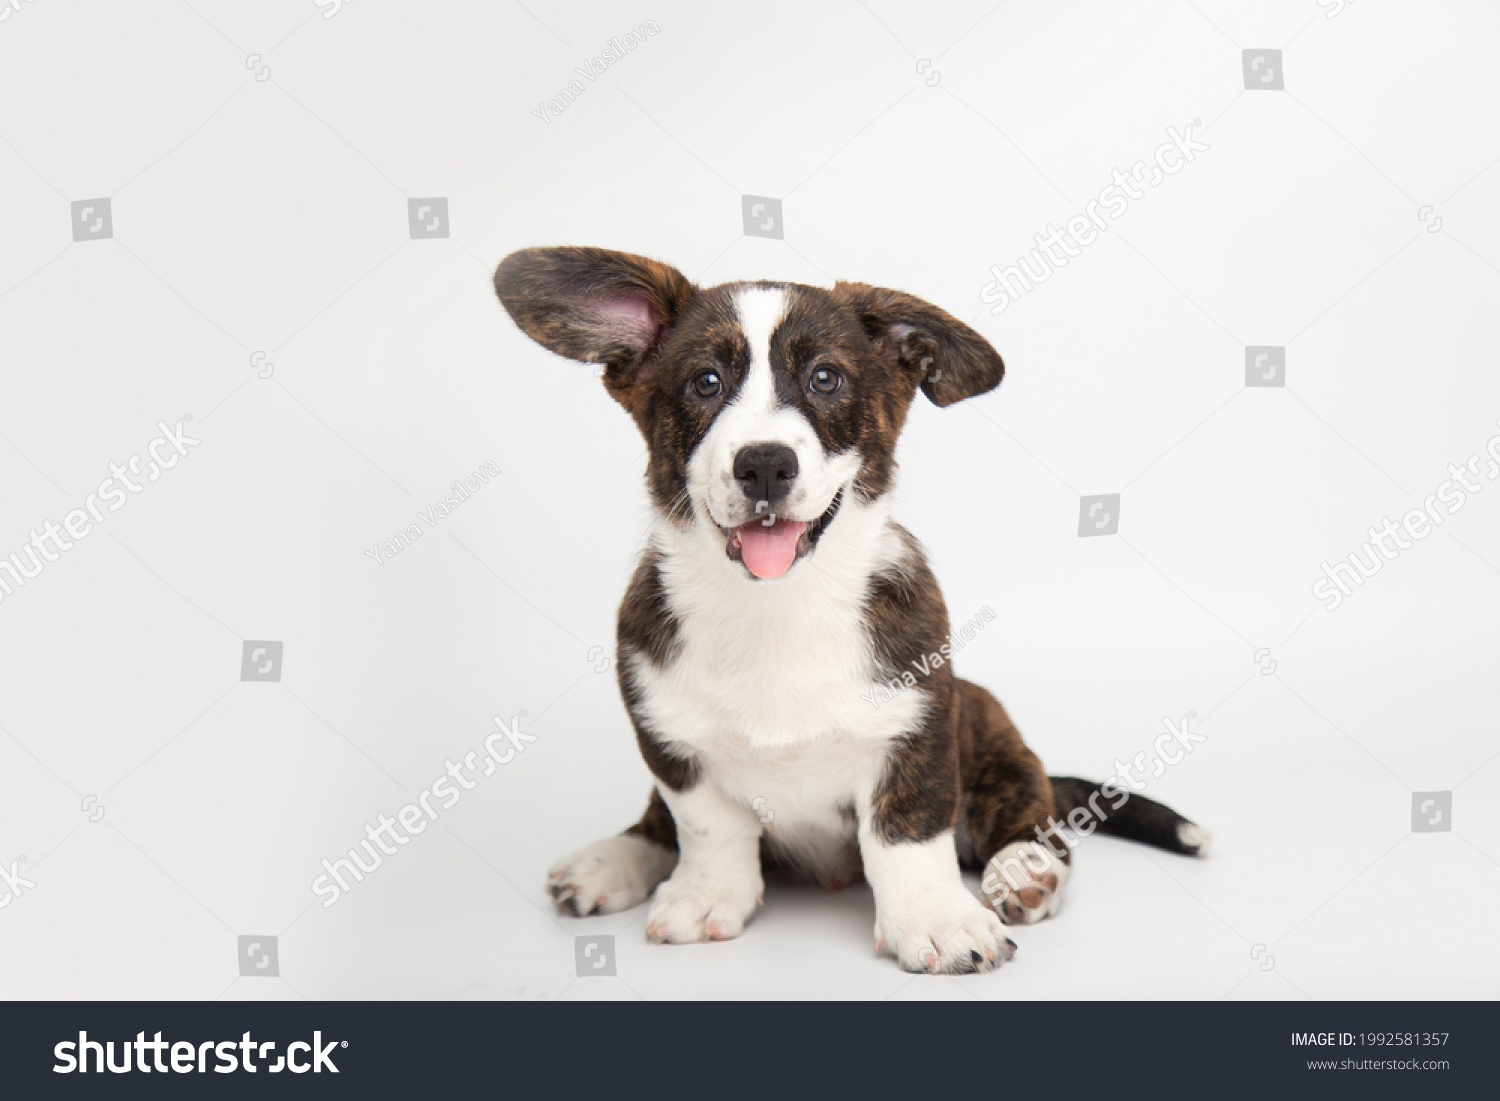 Welsh Corgi Cardigan cute fluffy dog puppy. funny animals on white background with copy space #1992581357